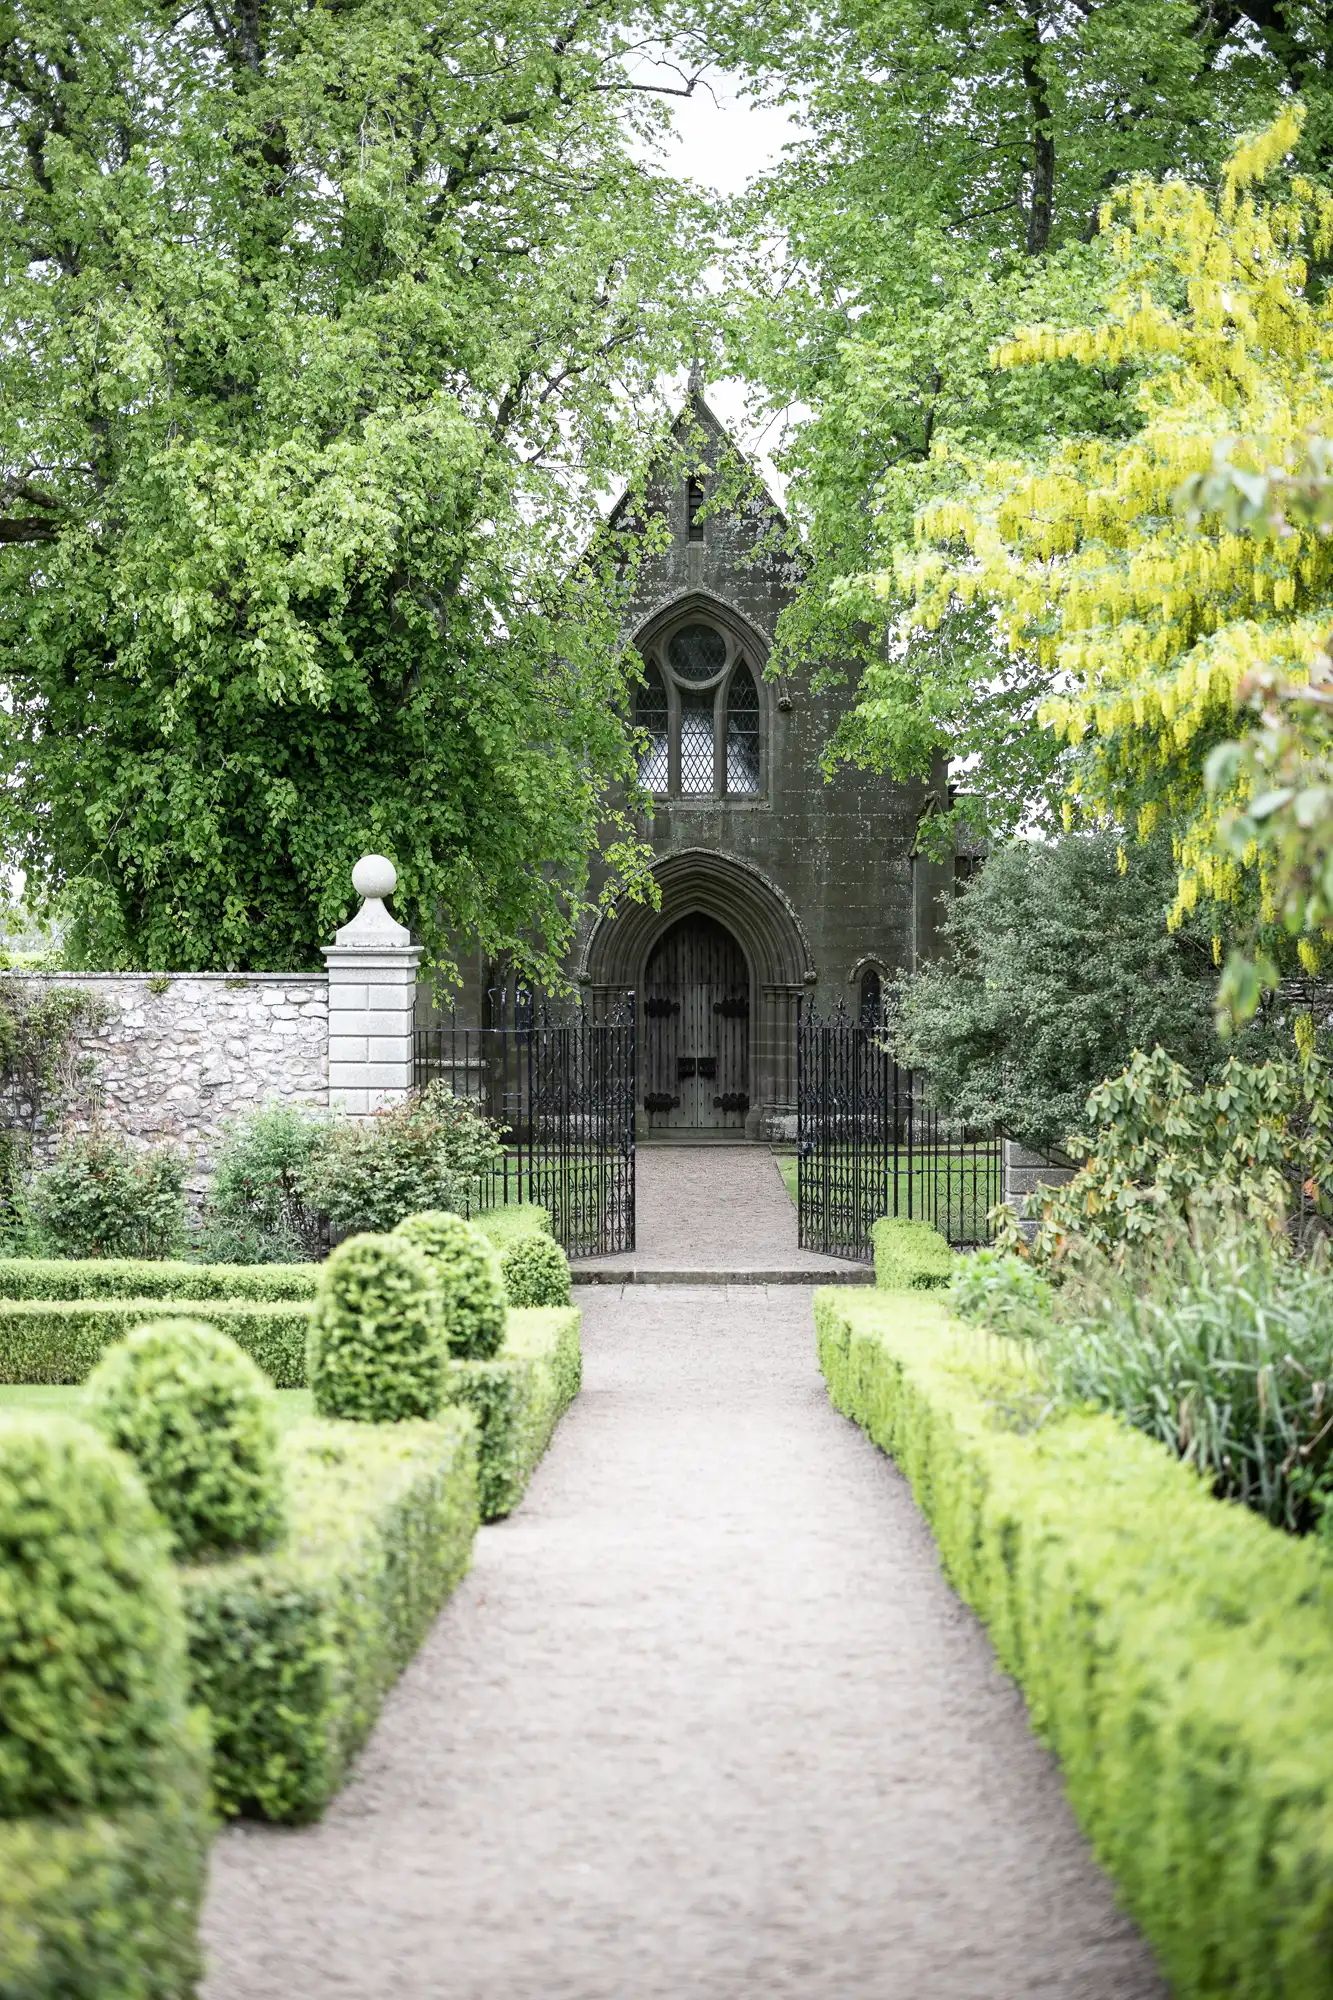 A landscaped garden path leads to a Gothic-style stone chapel surrounded by lush greenery and topiary hedges.